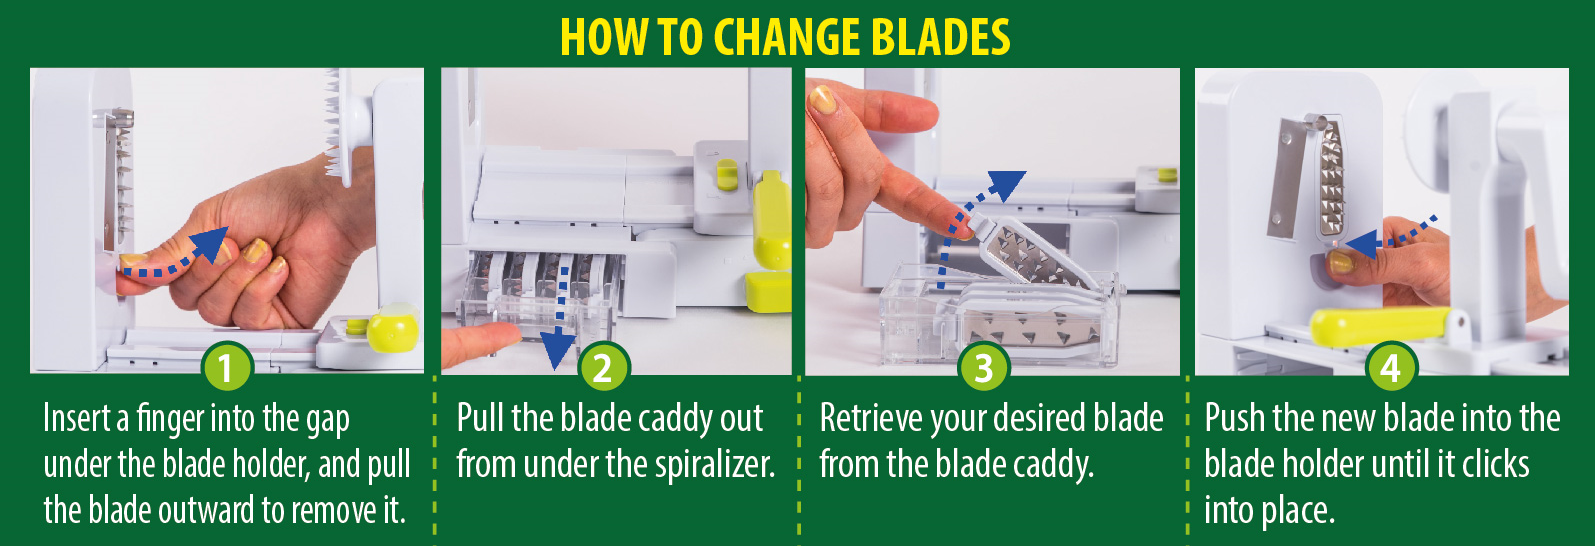 How to change blades